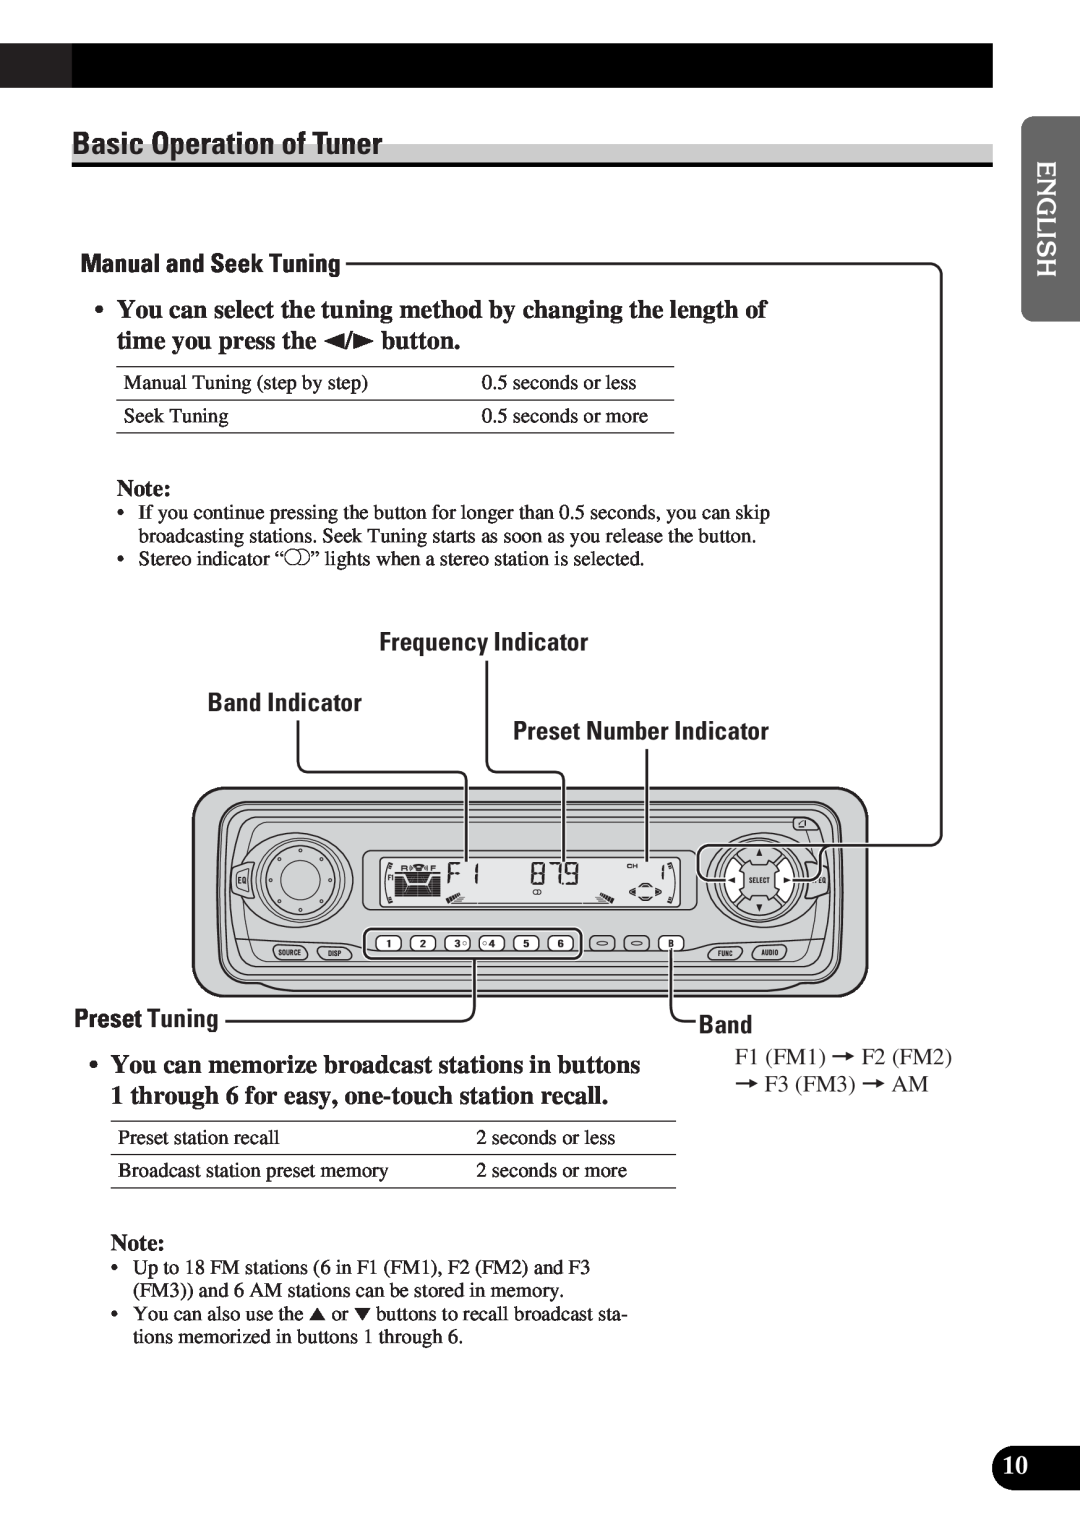 Pioneer DEH-P4300 Basic Operation of Tuner, Manual and Seek Tuning, Frequency Indicator Band Indicator, Preset 